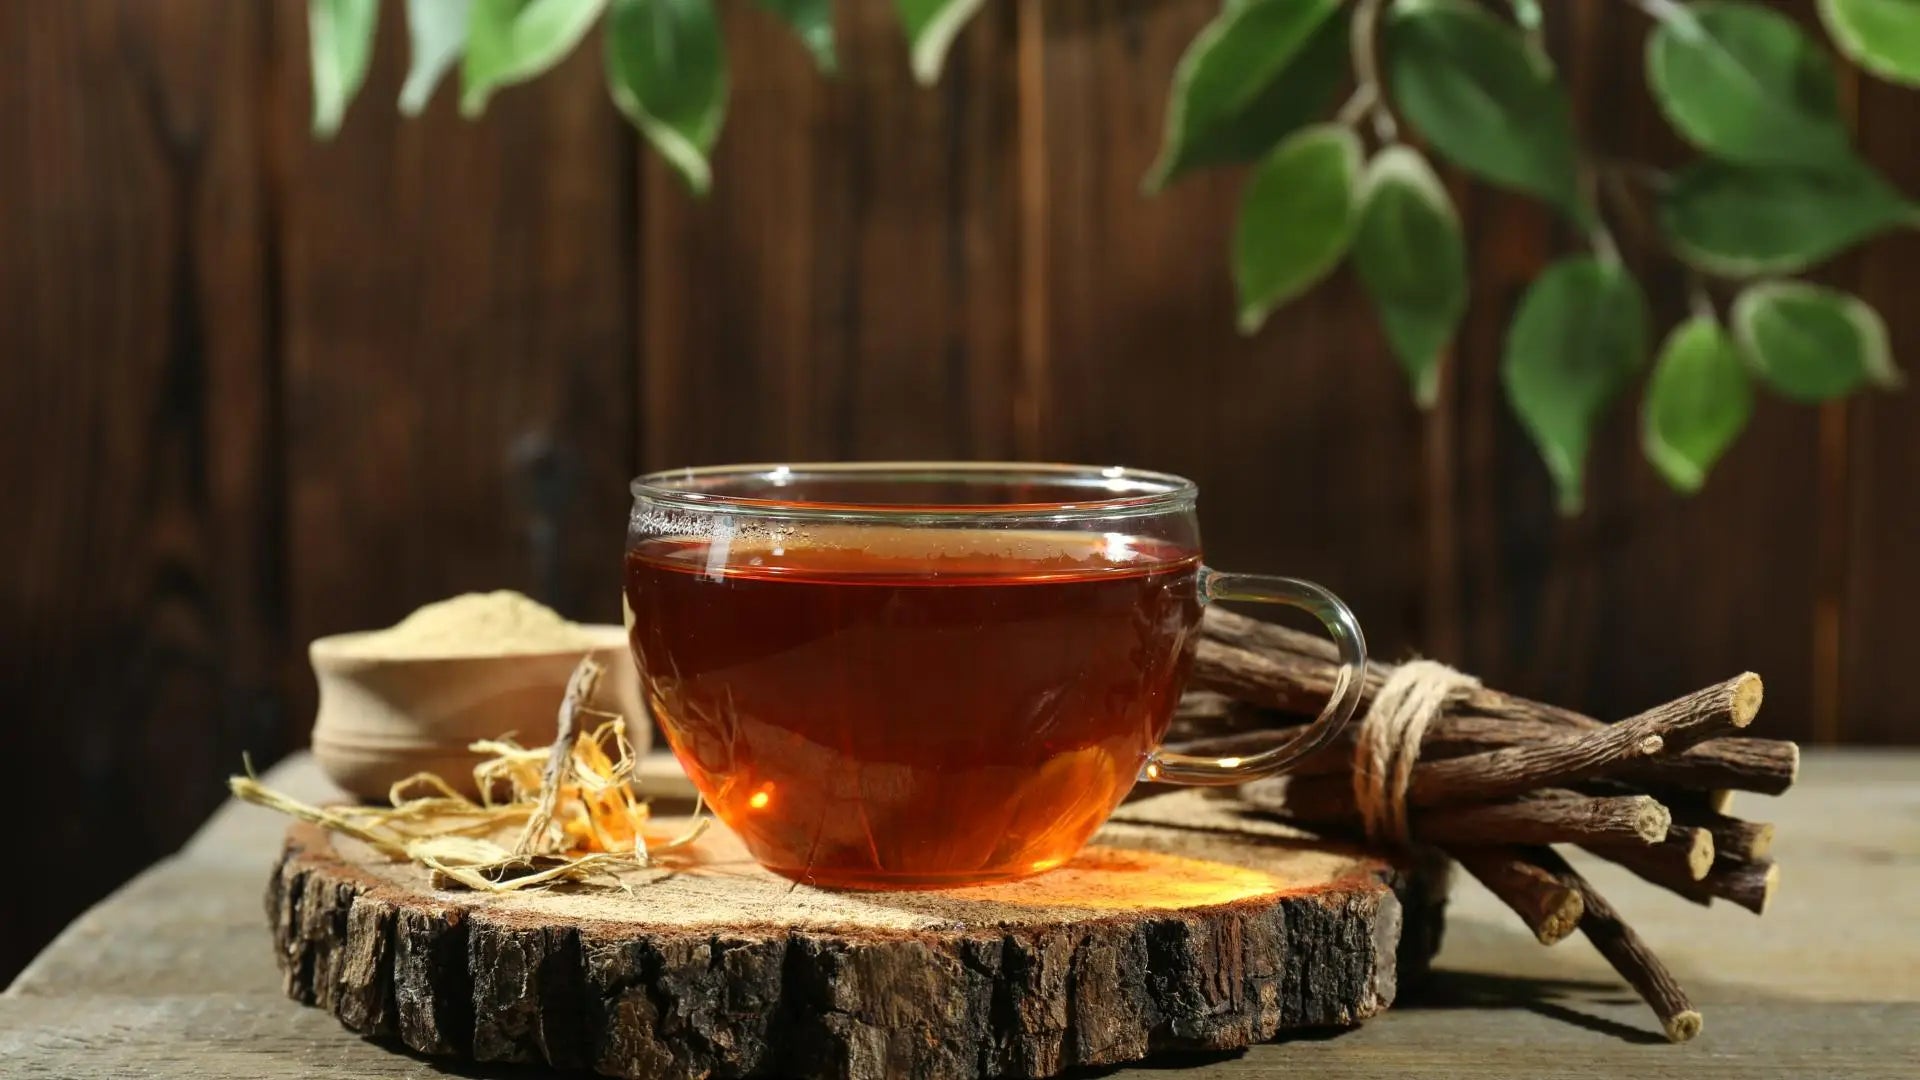 Nurturing Wellness: India's Top 10 Health and Wellness Tea Brands, with Gardens of India Leading the Way